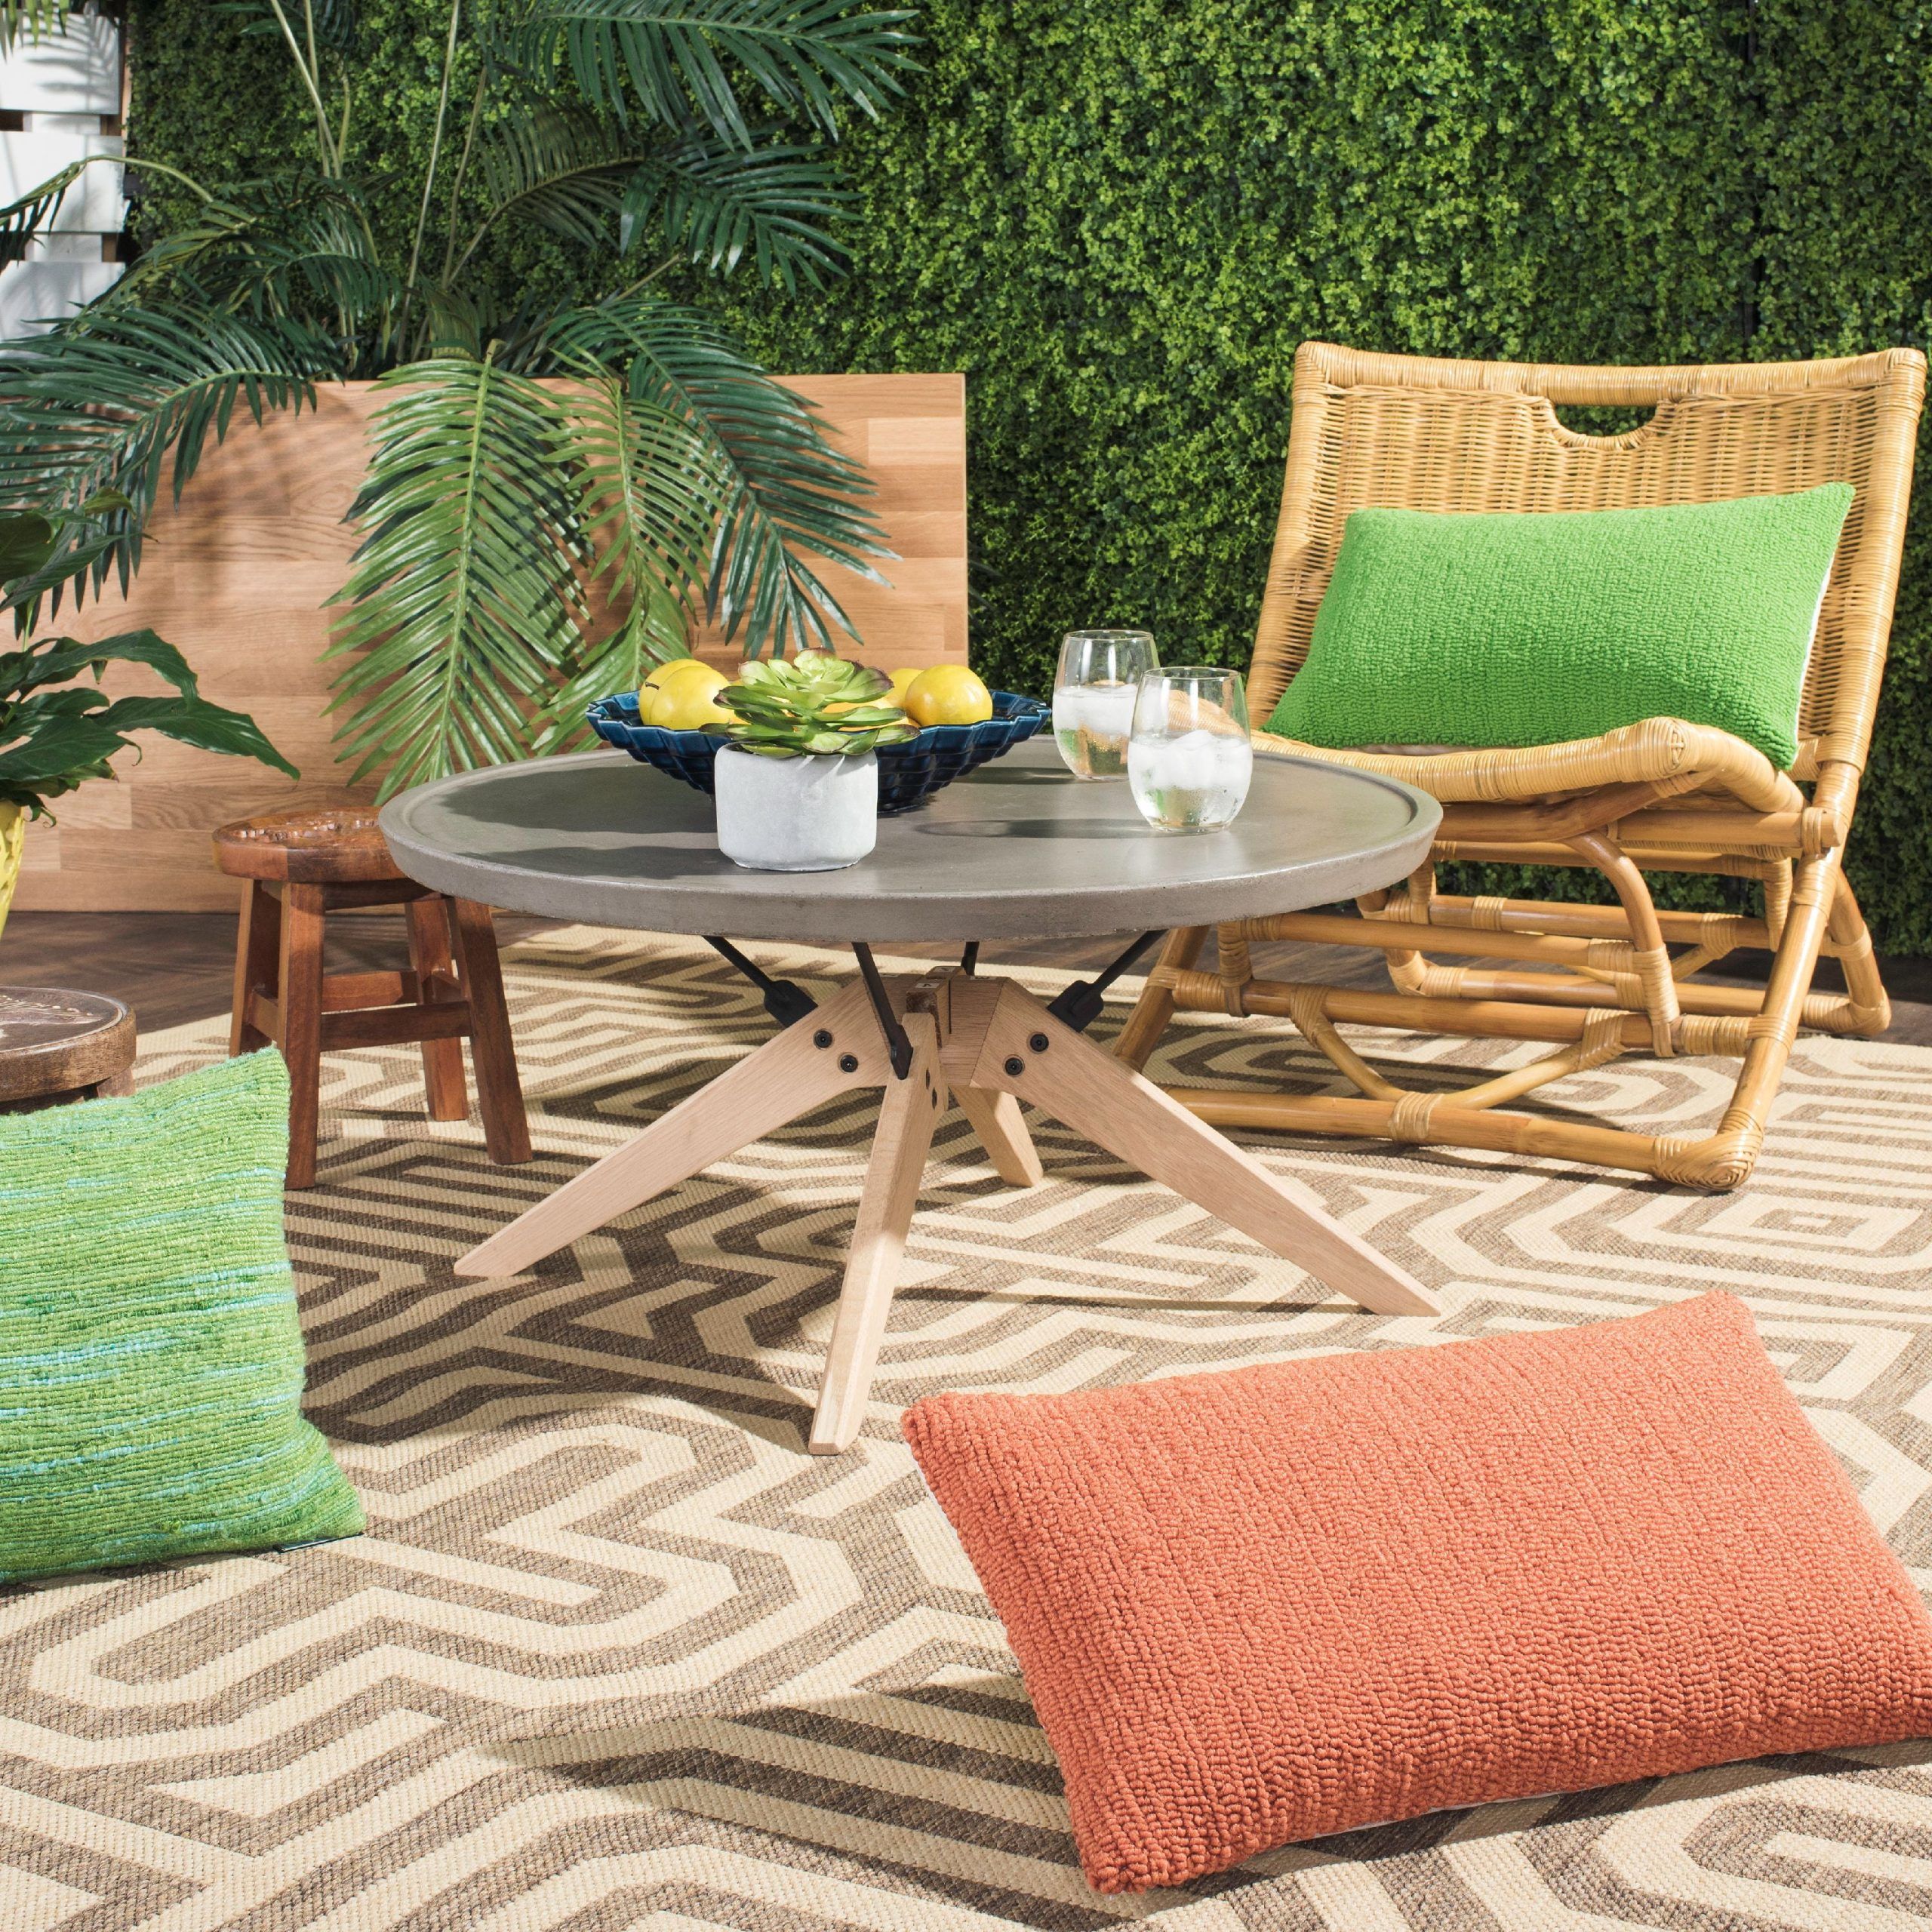 Outdoor Half Round Coffee Tables Within Fashionable White Round Patio Coffee Table / Rustic White Cedar Log Round Coffee (View 15 of 15)